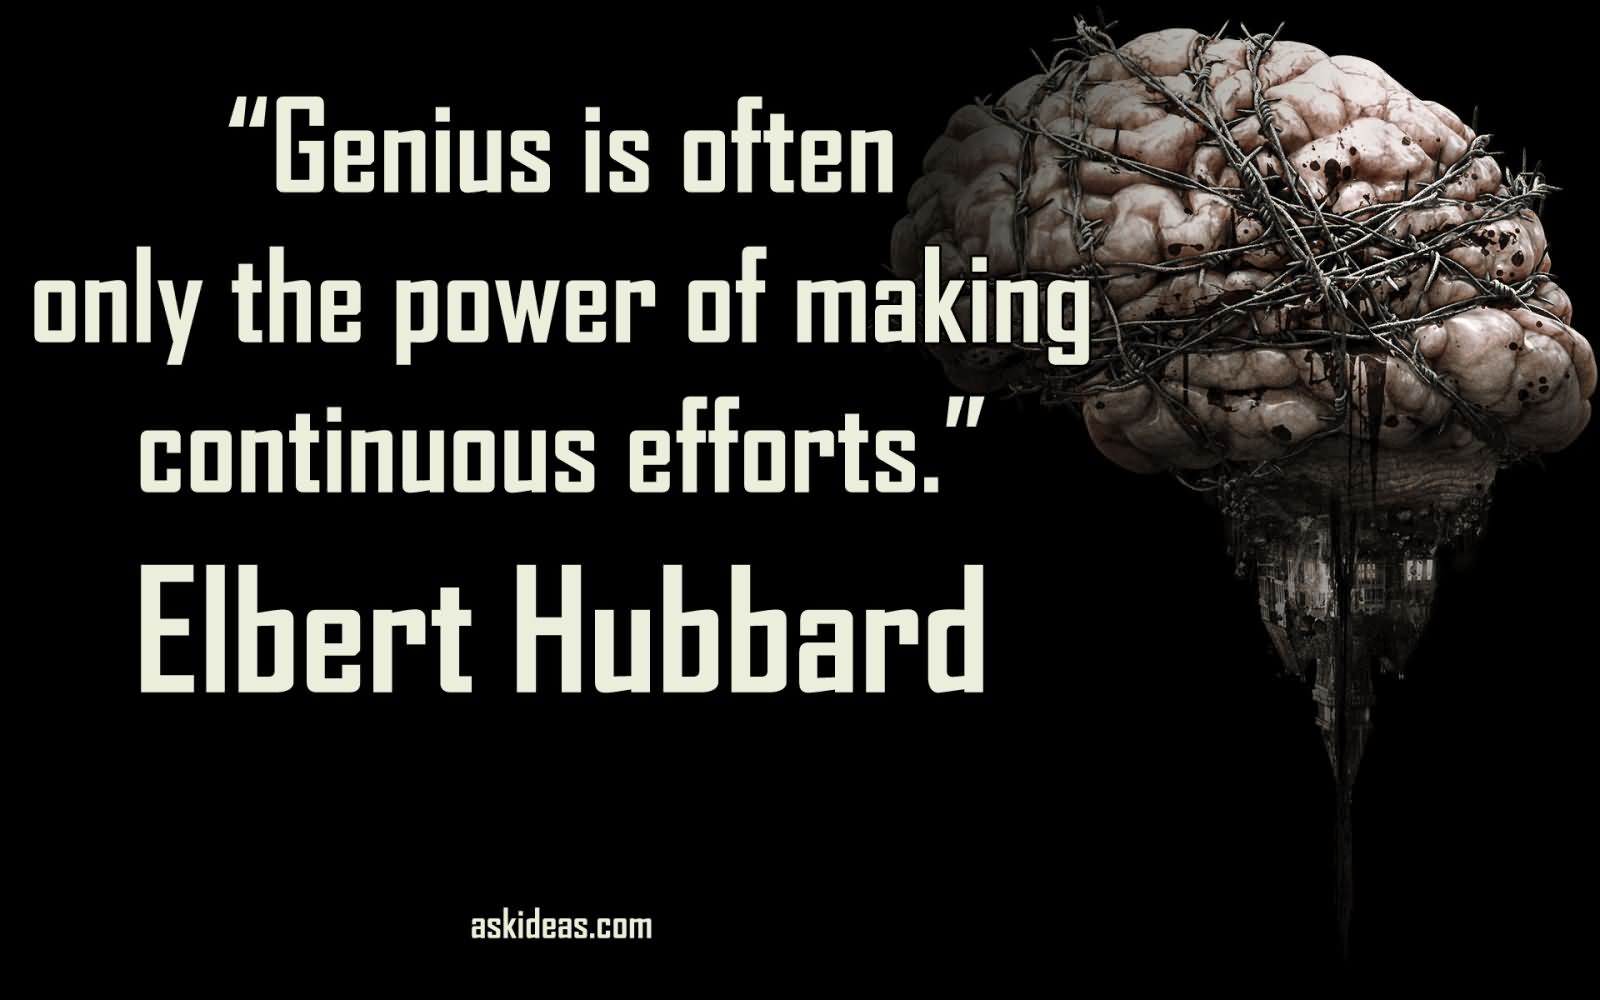 Genius is often only the power of making continuous efforts.